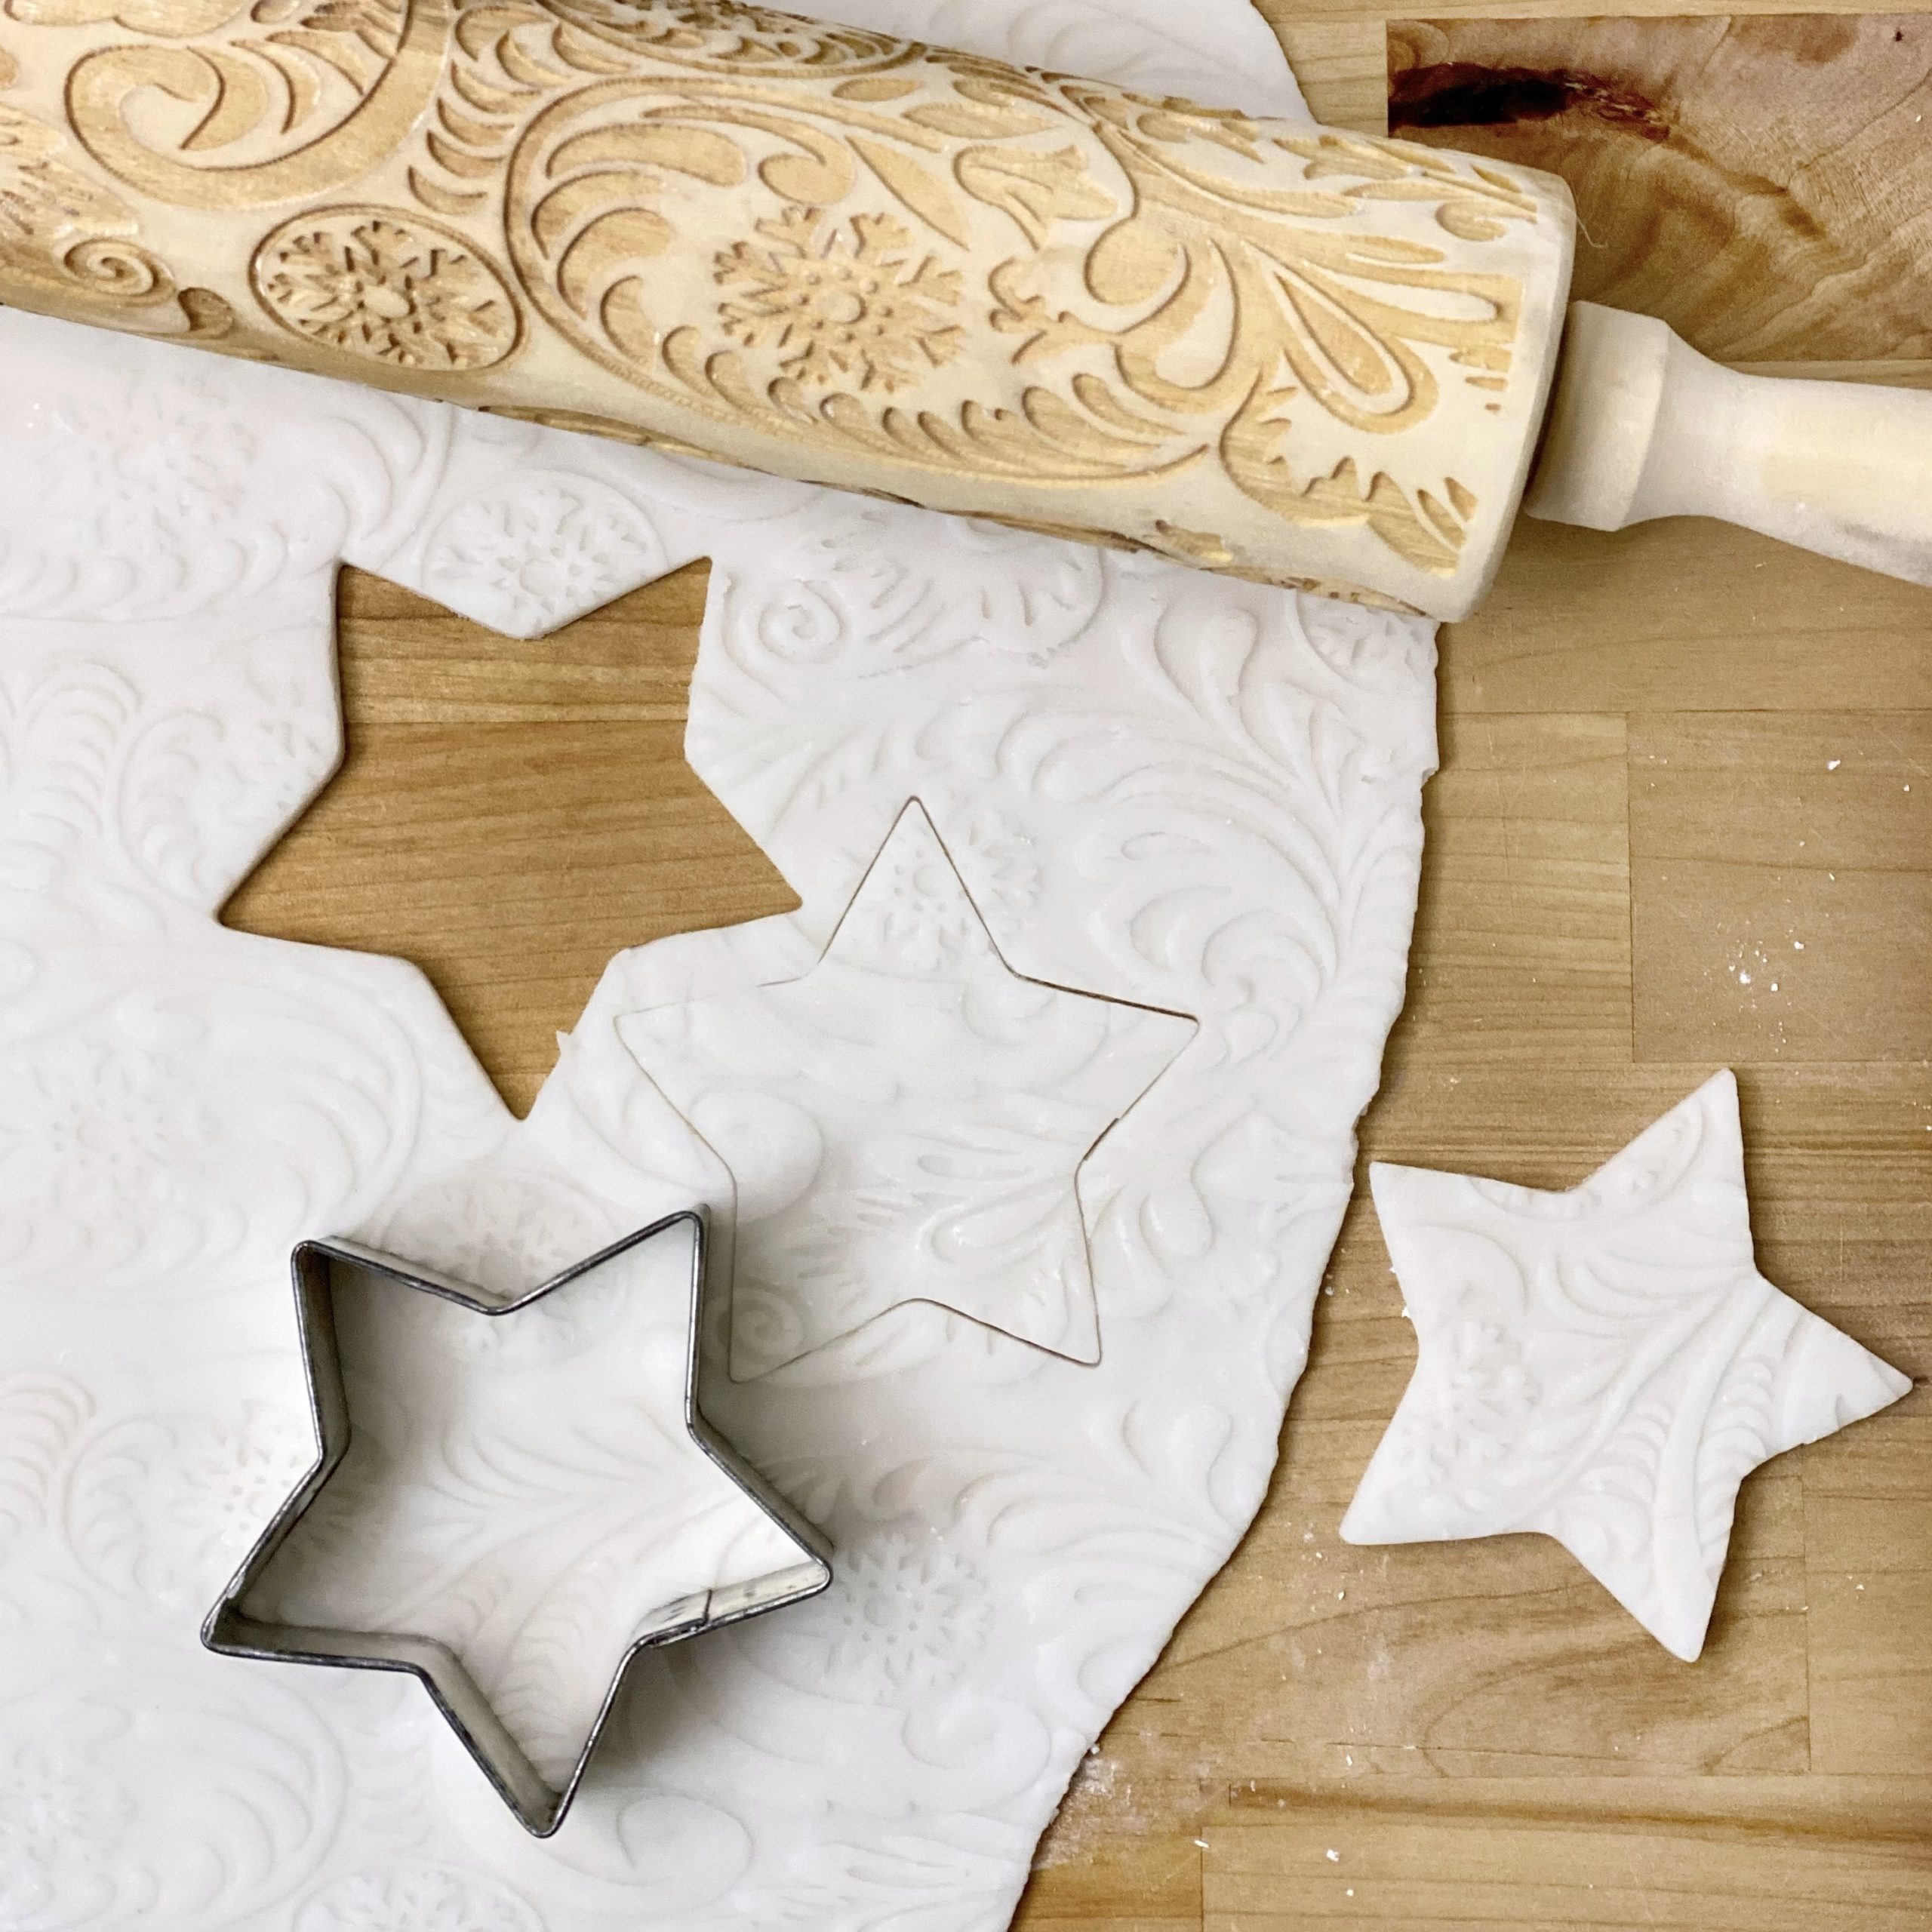 Star Christmas ornaments being cut out of dough with an embossed rolling pin next to it.